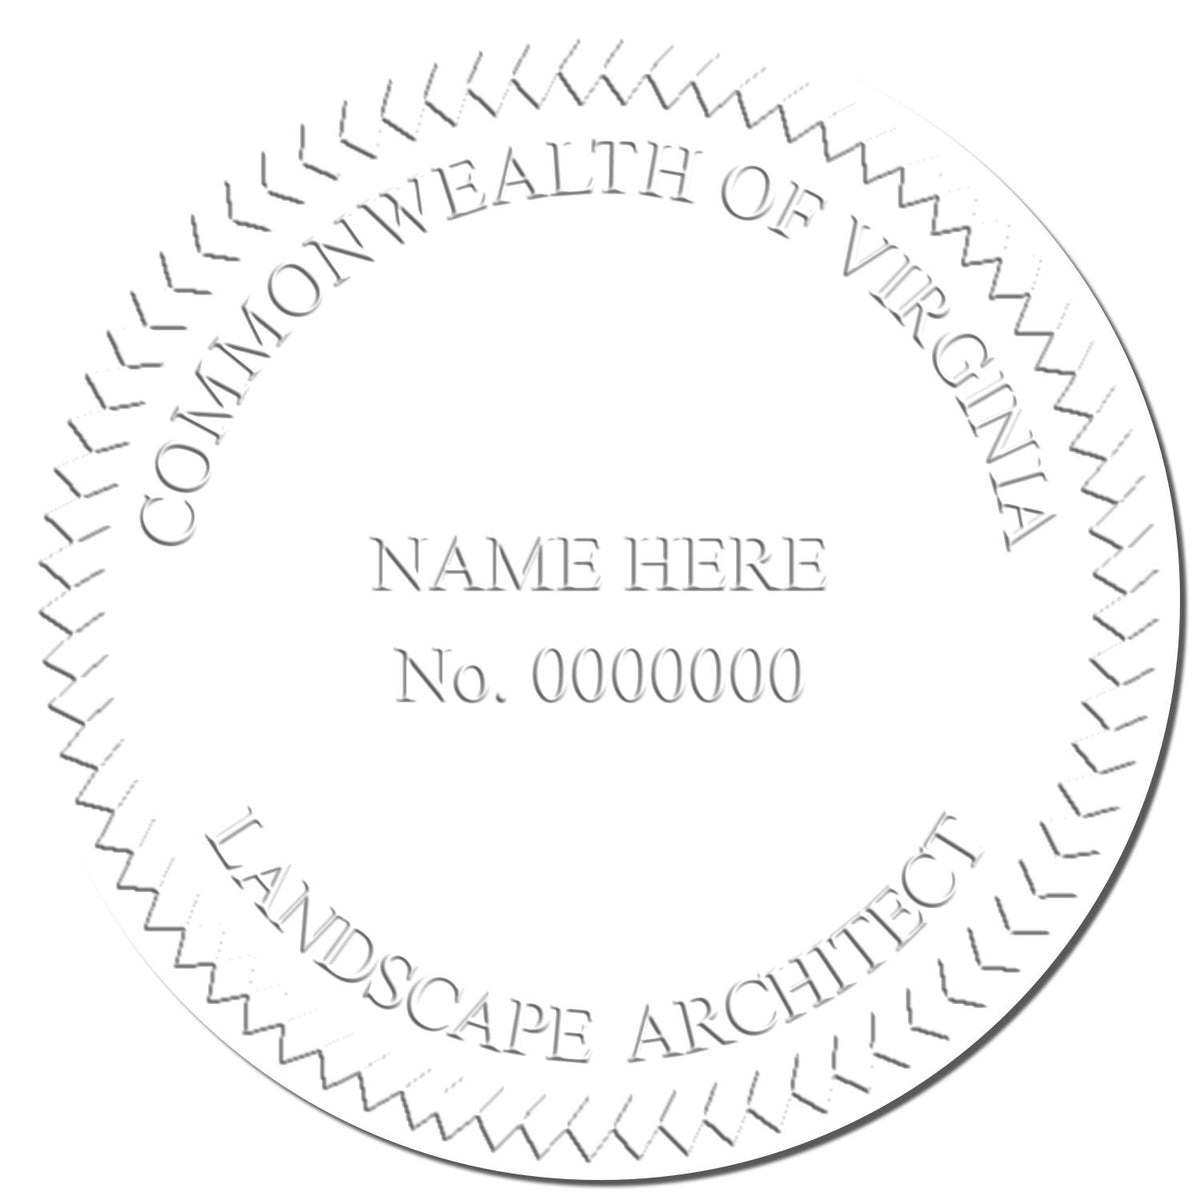 This paper is stamped with a sample imprint of the Gift Virginia Landscape Architect Seal, signifying its quality and reliability.